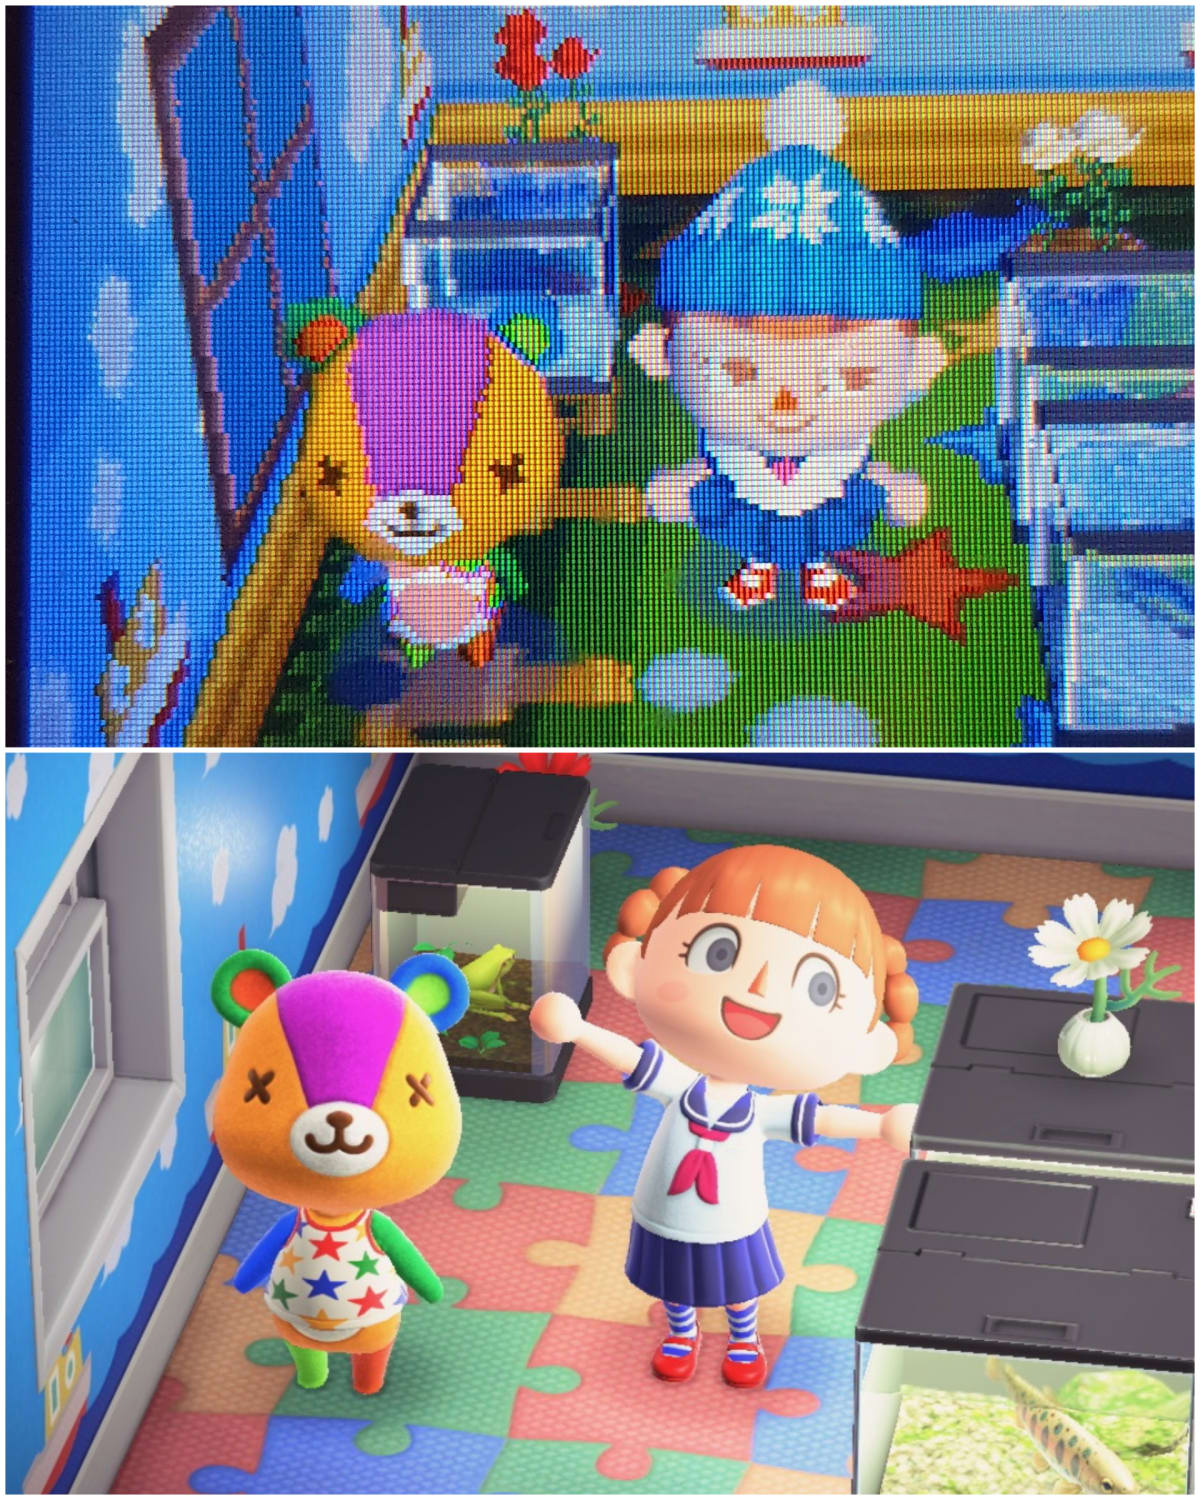 Recreated Stitches'... Interesting? decor choices from my Wild World town! I've had my island for almost two years and the difference in quality still blows my mind.